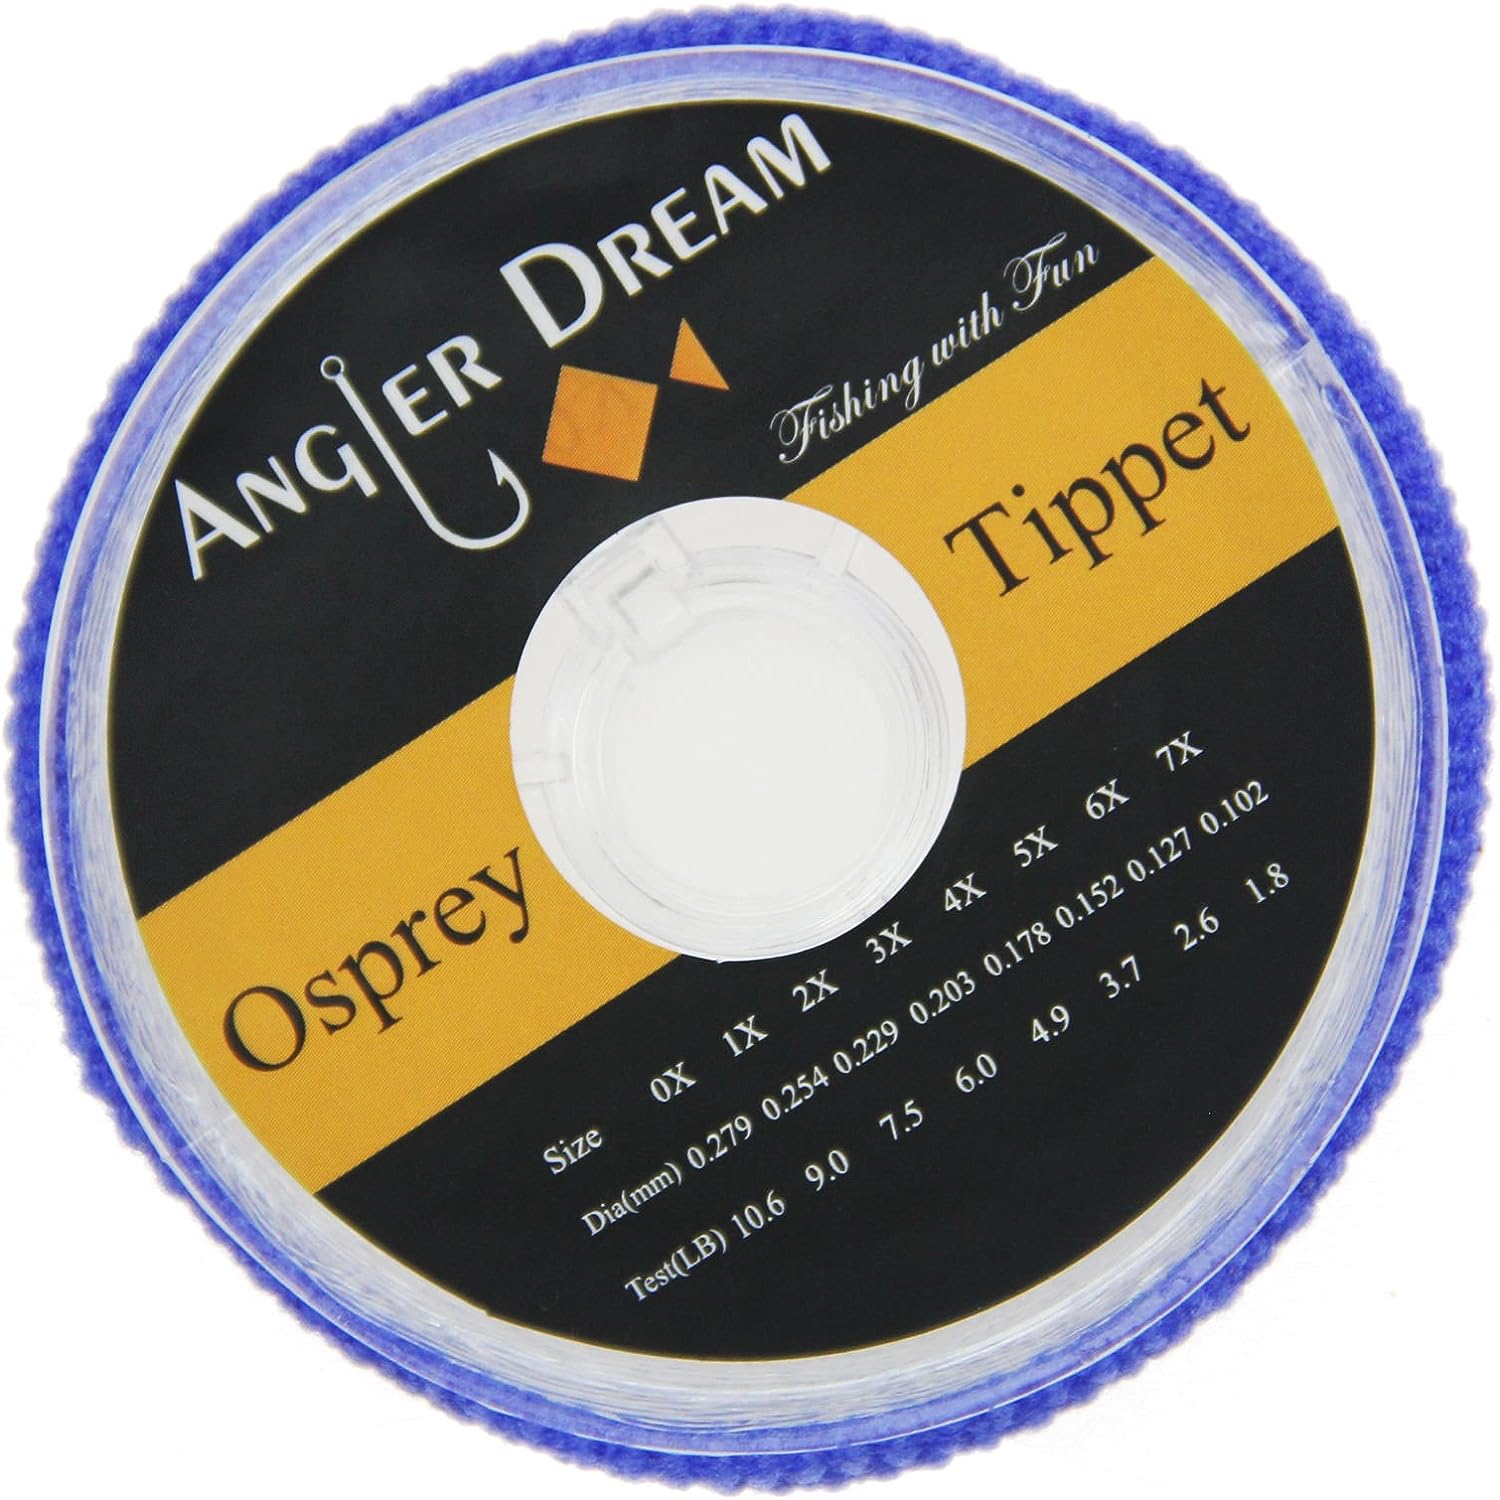 Anglerdream 2 3 4 5 6X Tippet Line Clear Nylon 50m /55Yds Fly Fishing Tippet Line with Tippet Holder